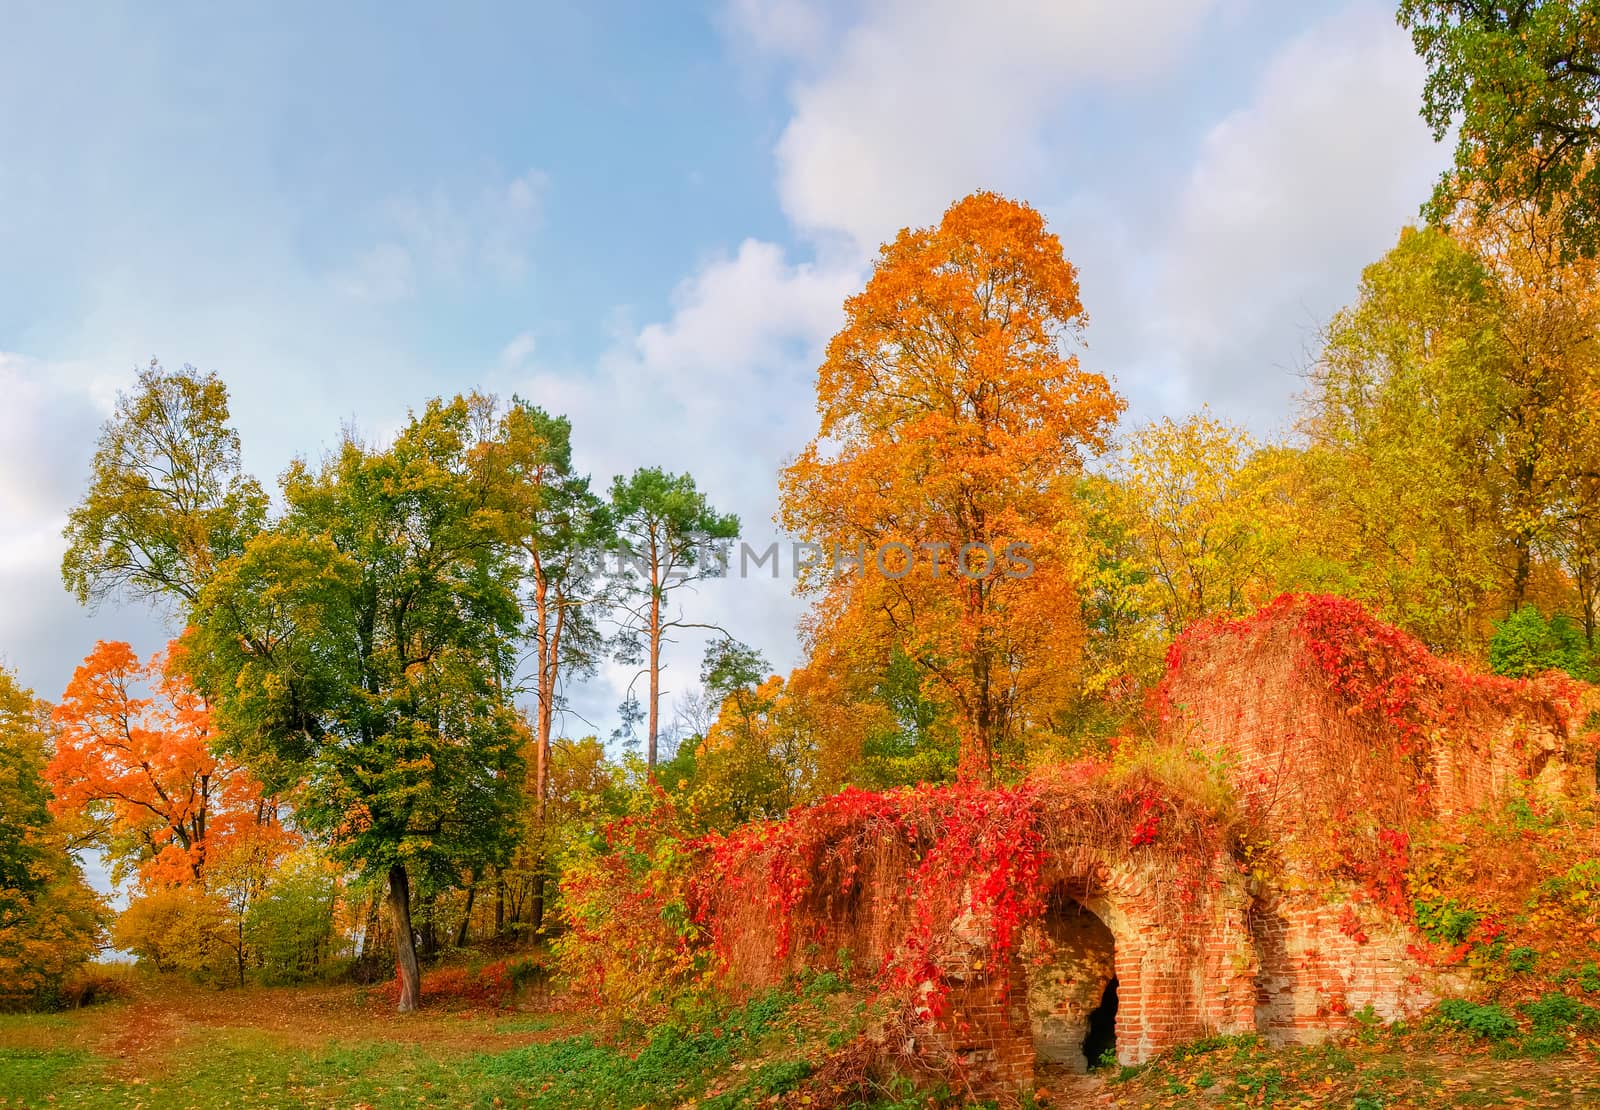 Fragment of the autumn park with decorative ruins in foreground by anmbph